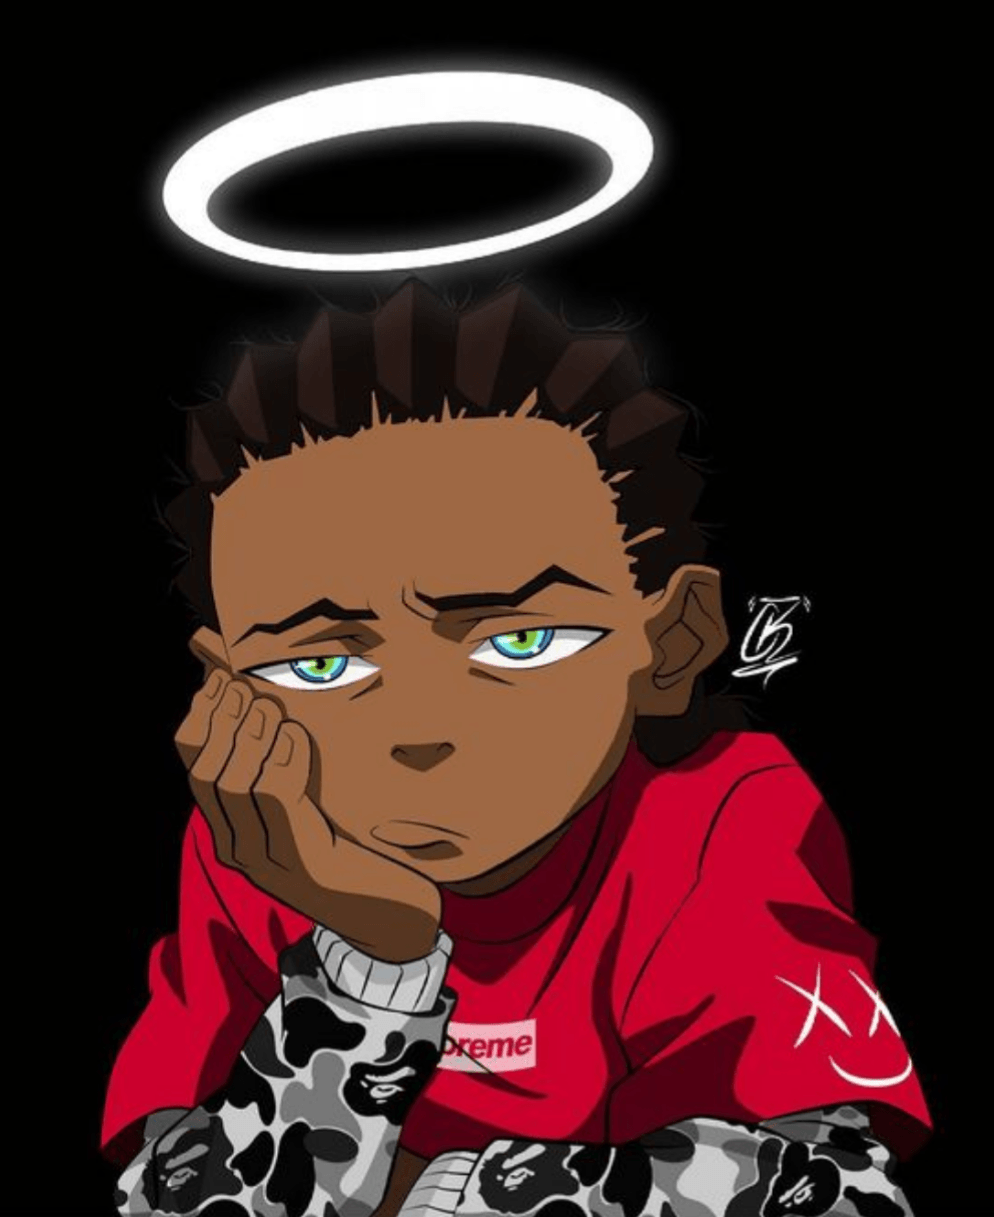 Boondocks Supreme Wallpapers Wallpaper Cave Huey boondocks supreme bape you looking for is usable for all of you right here. boondocks supreme wallpapers